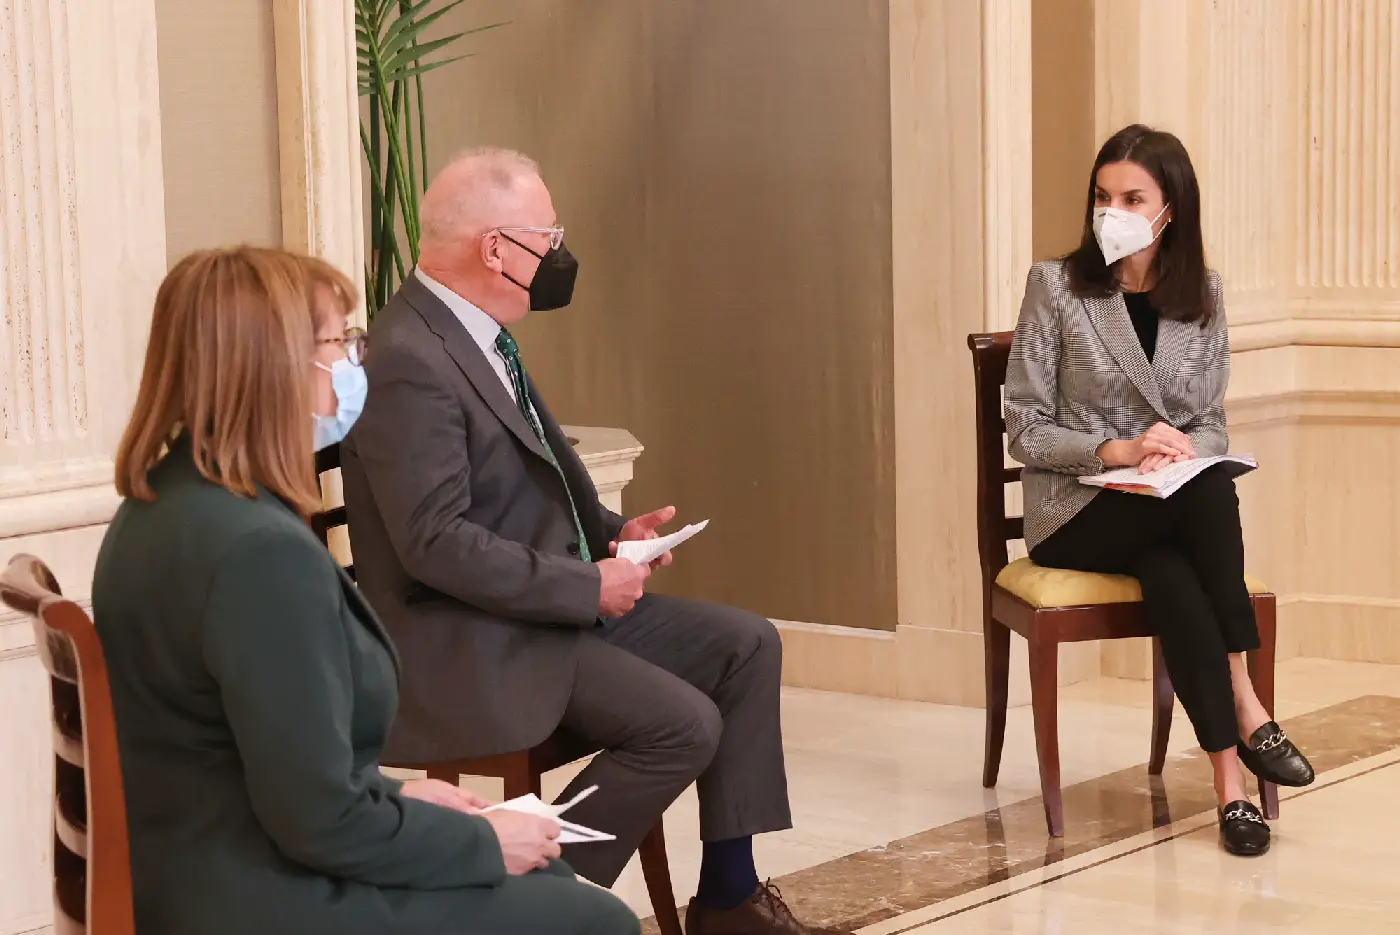 Queen Letizia visited the headquarters of the Confederation to inquire about the situation of the associative movement entities during the pandemic